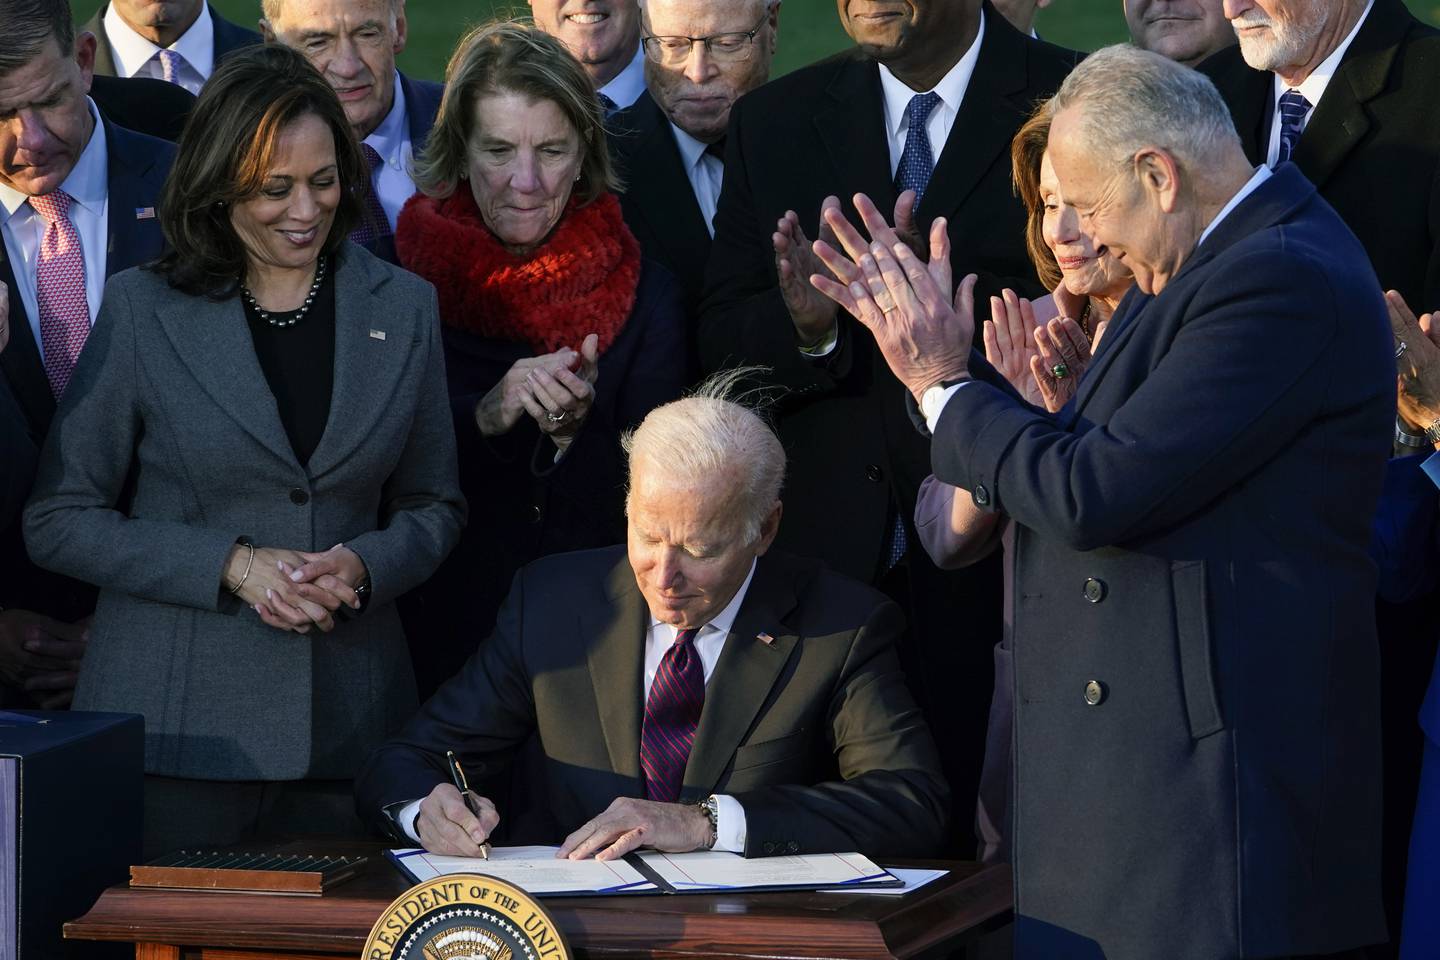 President Joe Biden signs the $1.2 trillion bipartisan infrastructure bill into law on the South Lawn of the White House in 2021. AP